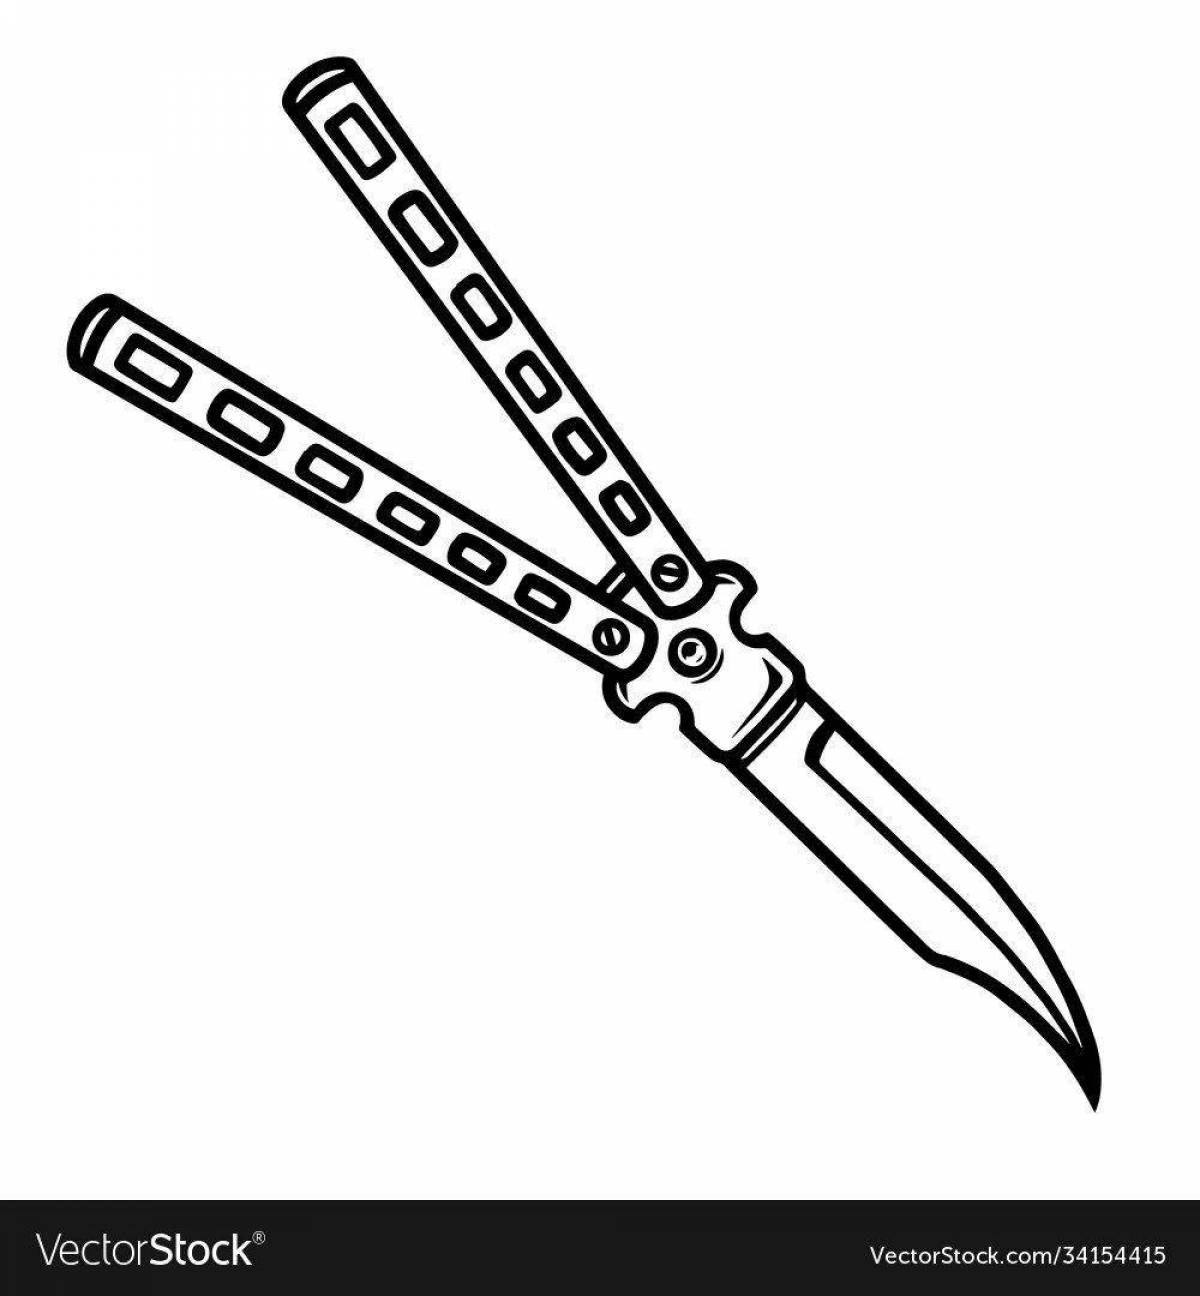 Awesome coloring pages with knife holders